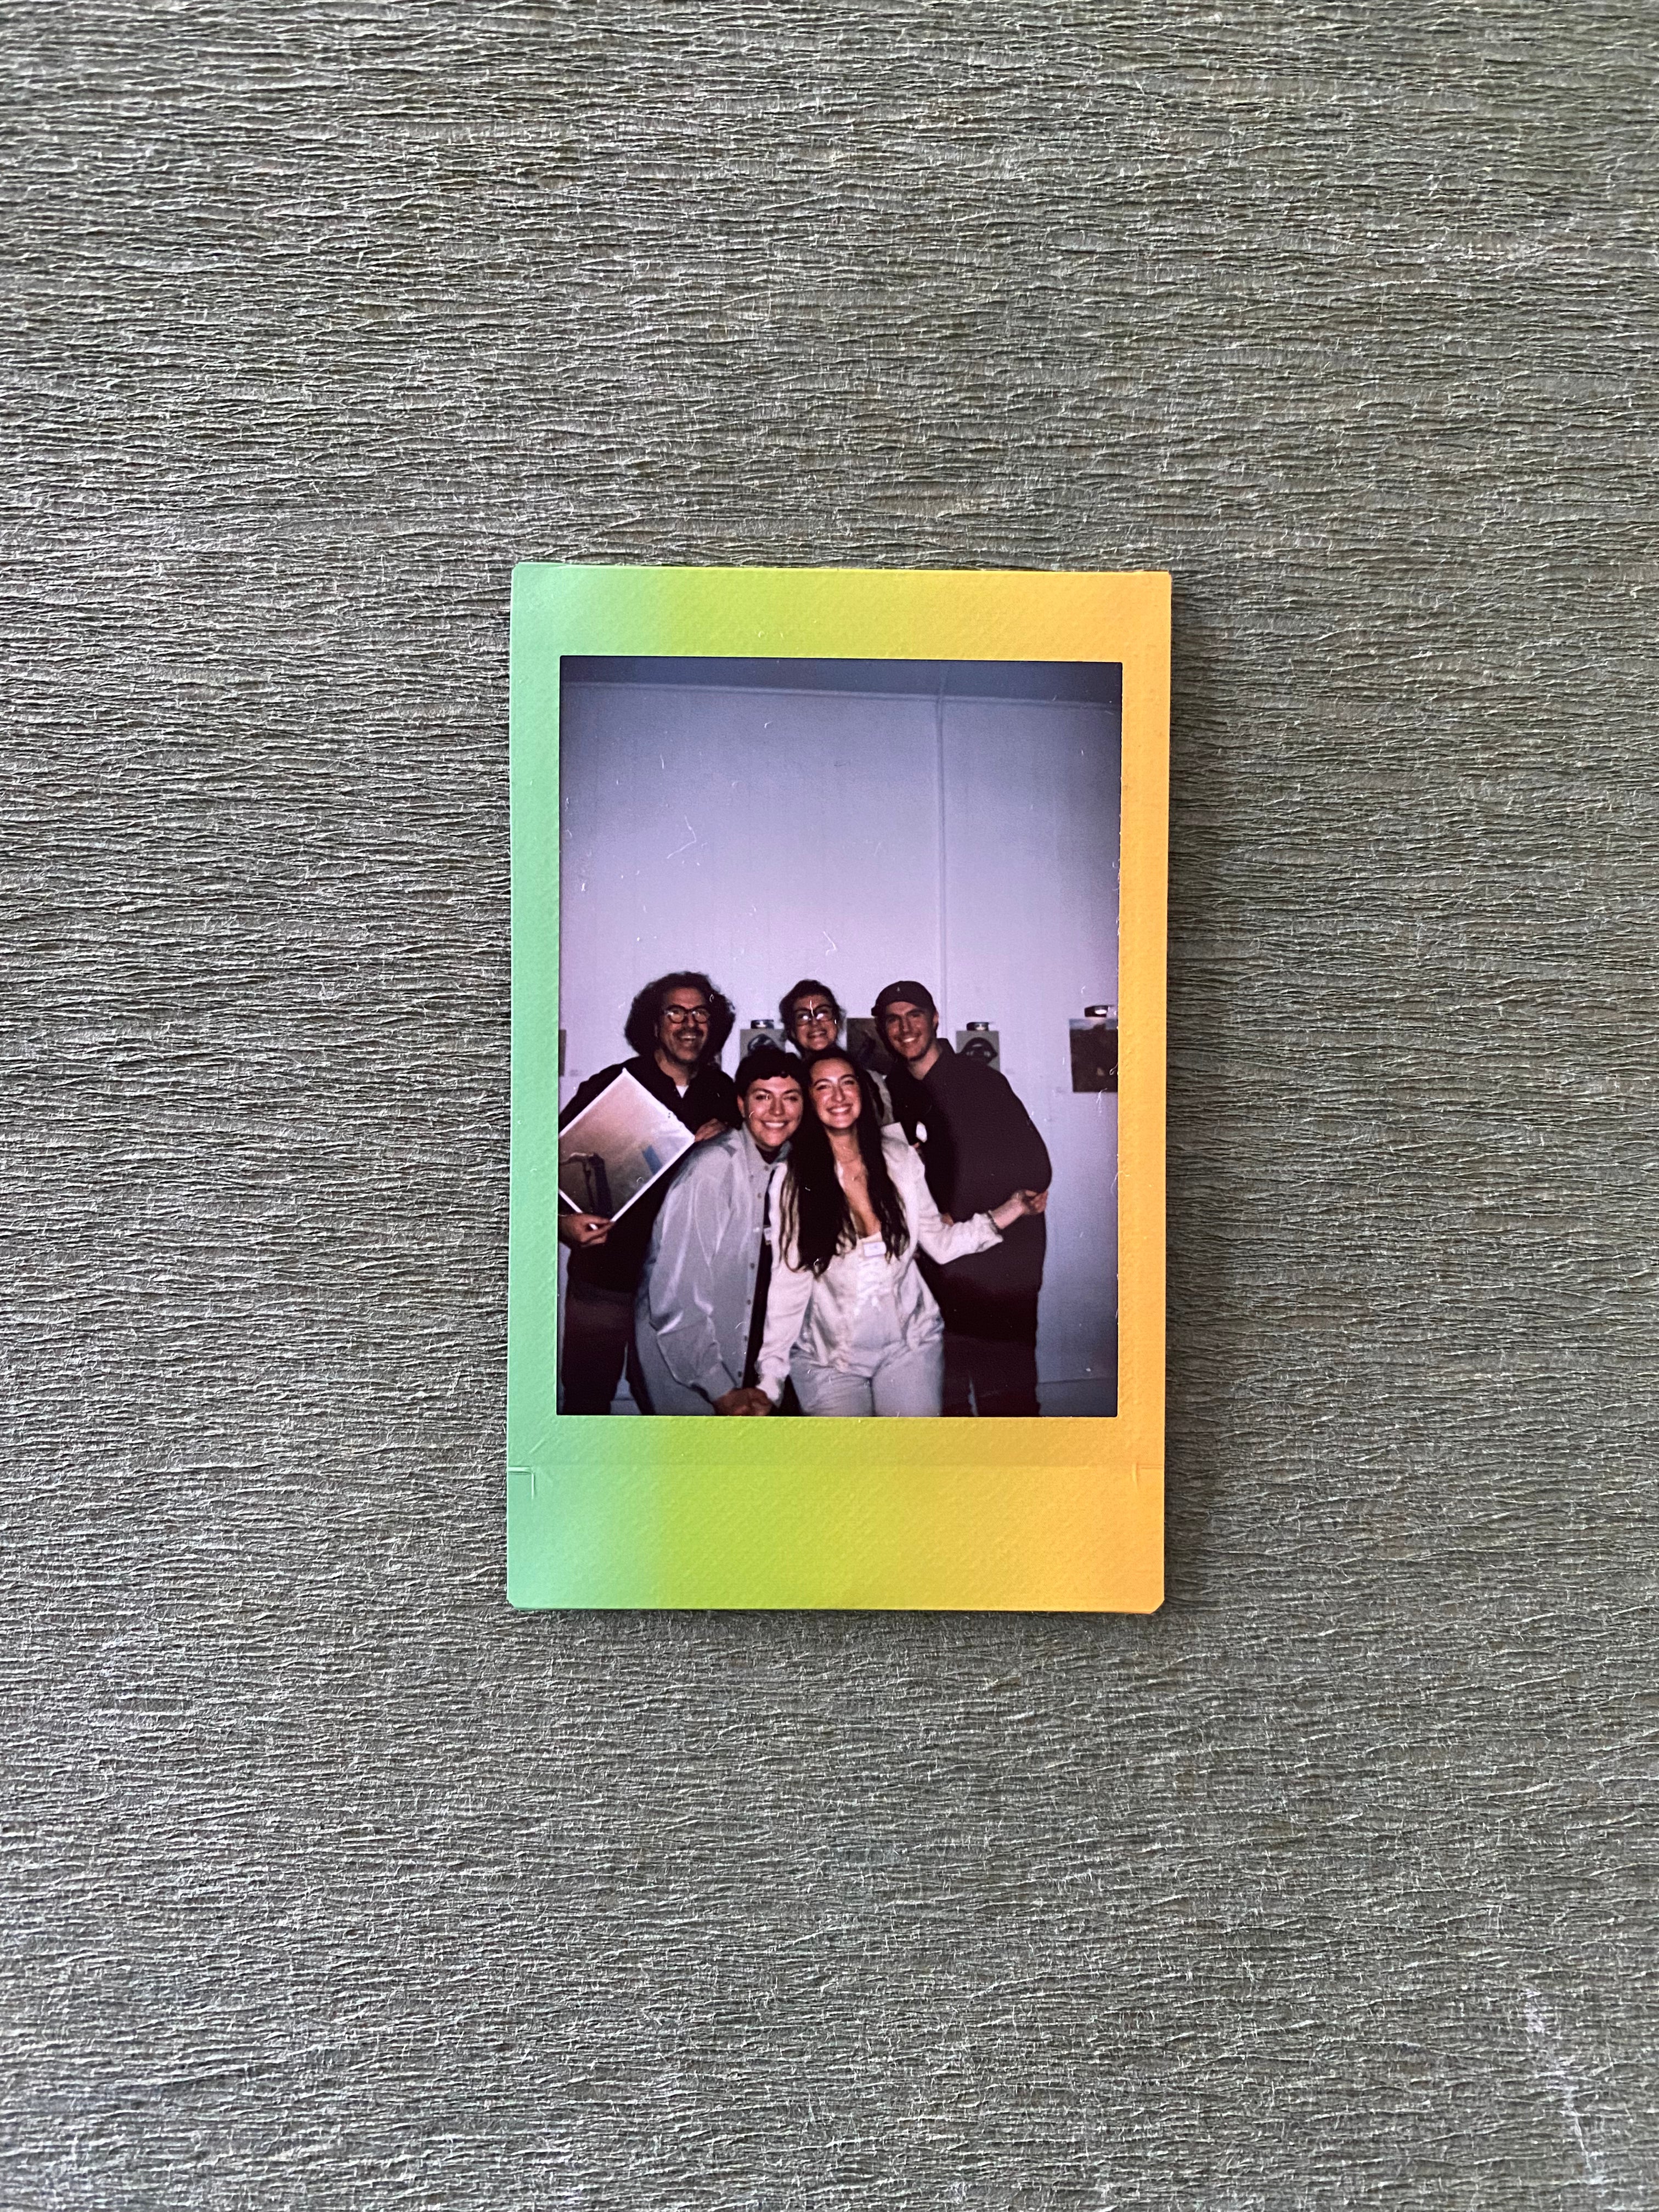 A polaroid photo features Bertie and their family: mom, dad, brother, and sister